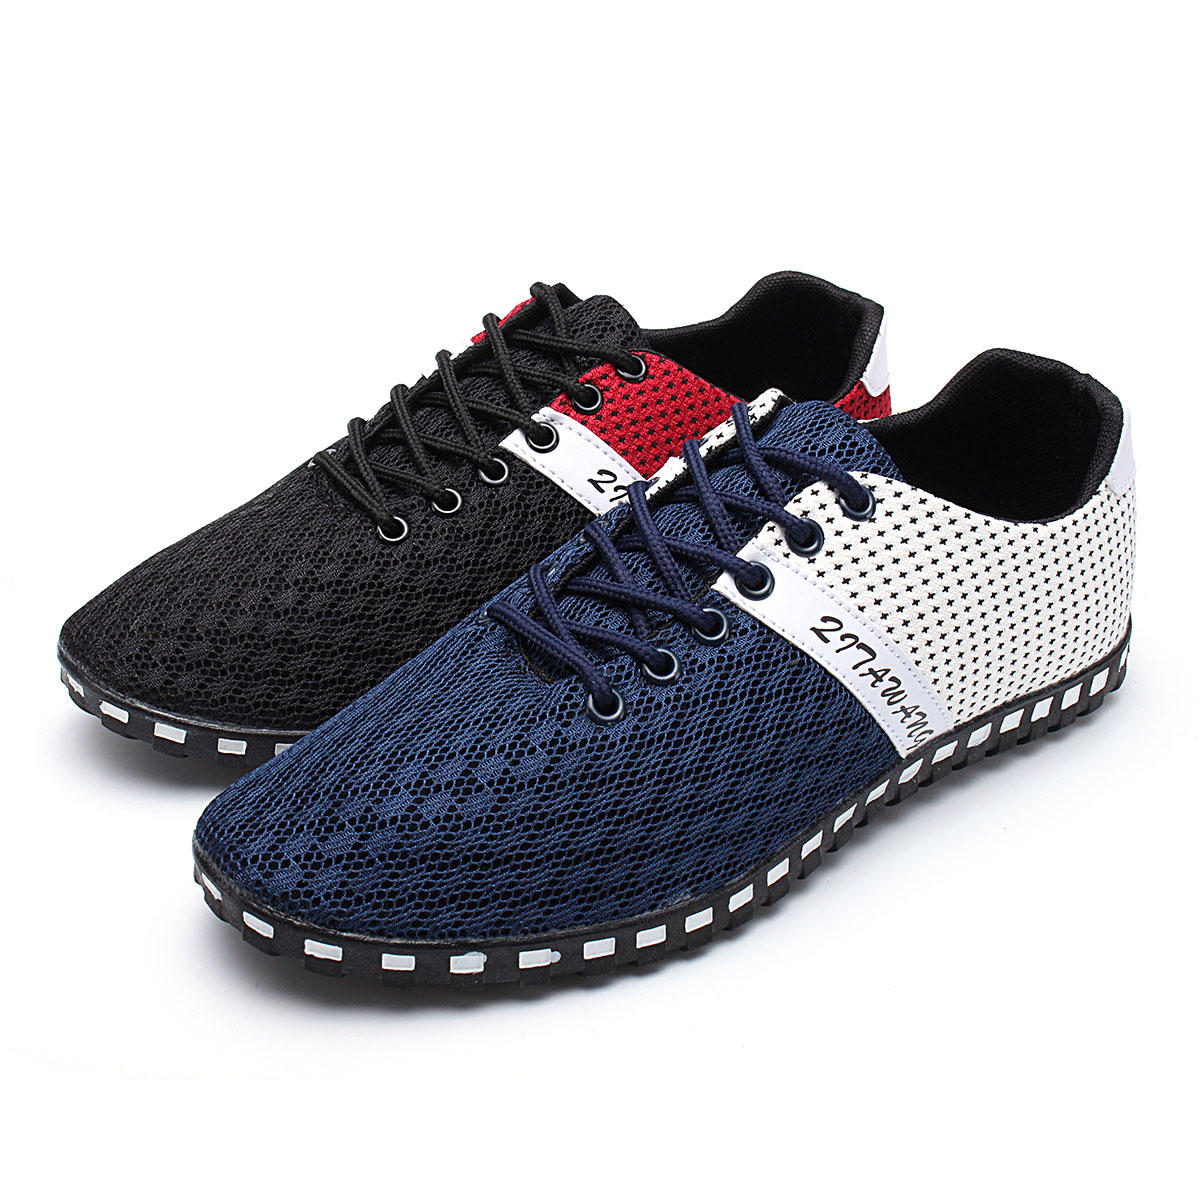 Men's Casual Sports Shoes Running Sneakers Breathable Ultralight Fitness Shoes Soft Wearable